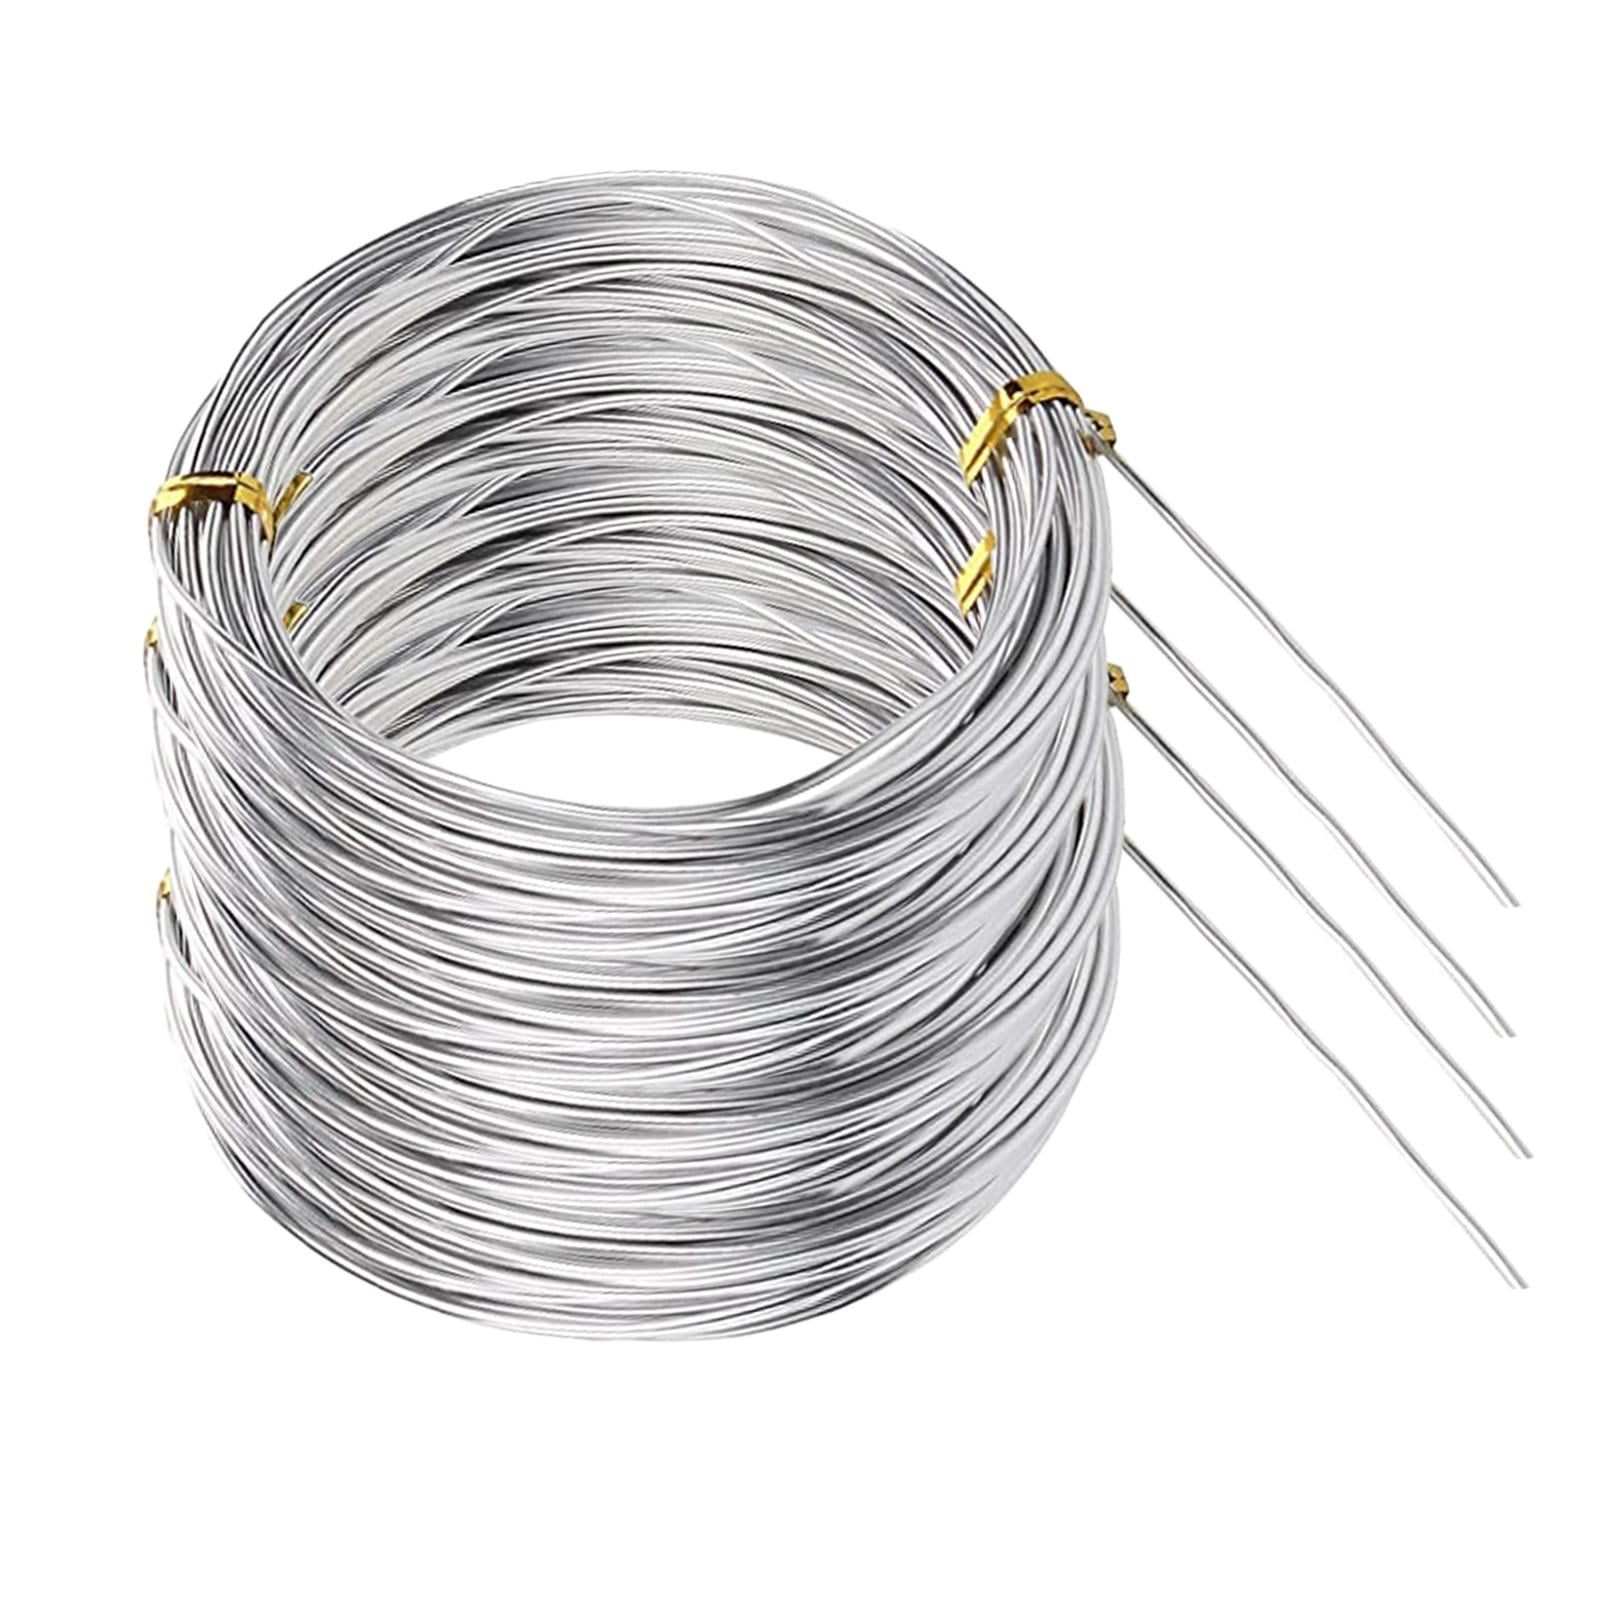 65.6 Feet Aluminum Craft Wire,15 Gauge Flexible Wire for Jewelry Making and Crafts Artistic Floral Jewelry Beading Wire for DIY, Doll Skeletons, 2